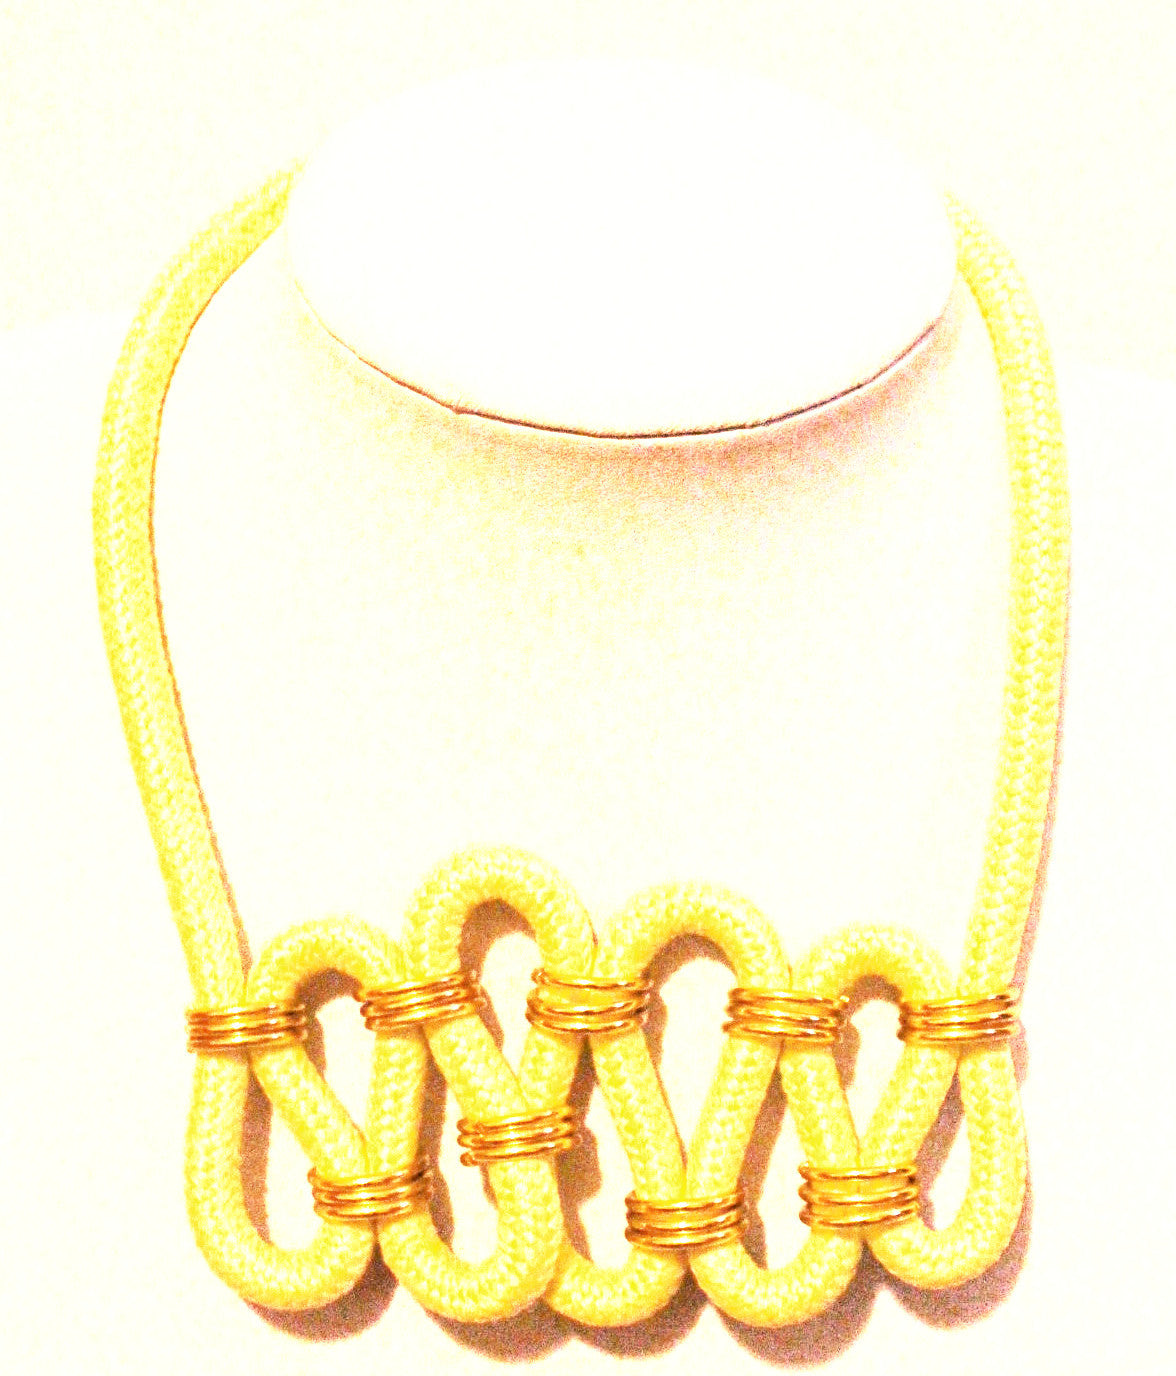 Yellow twisted rope necklace